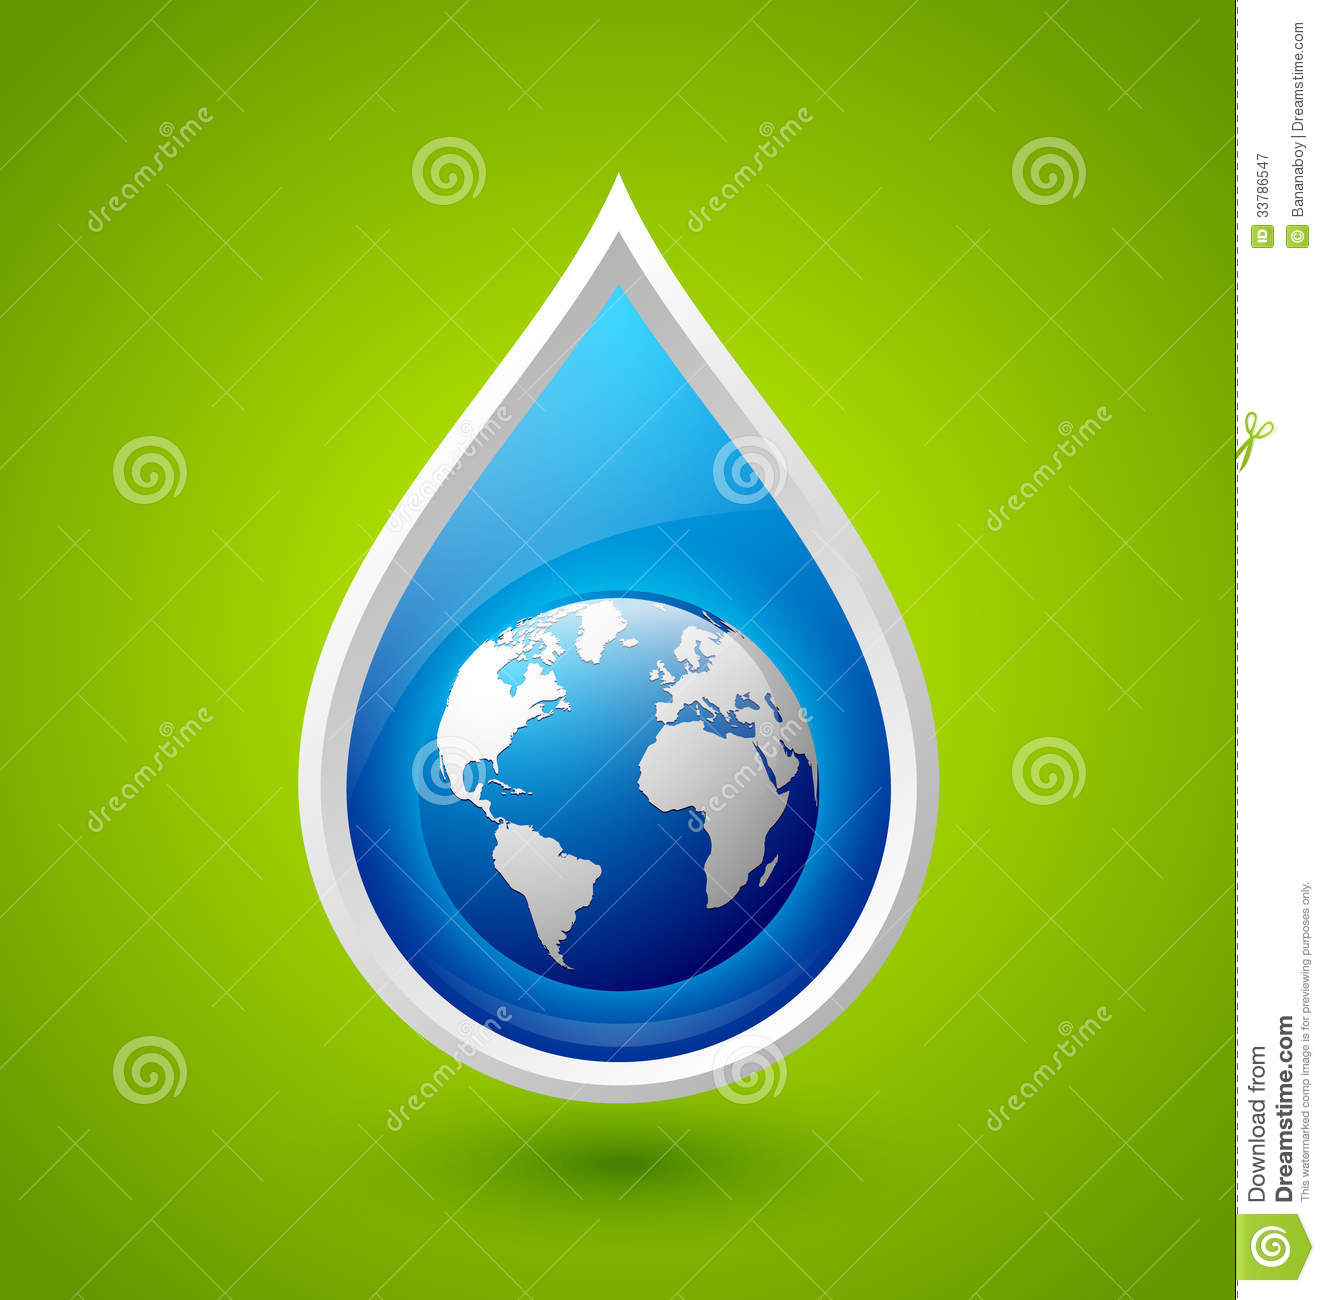 Water Drop with Earth